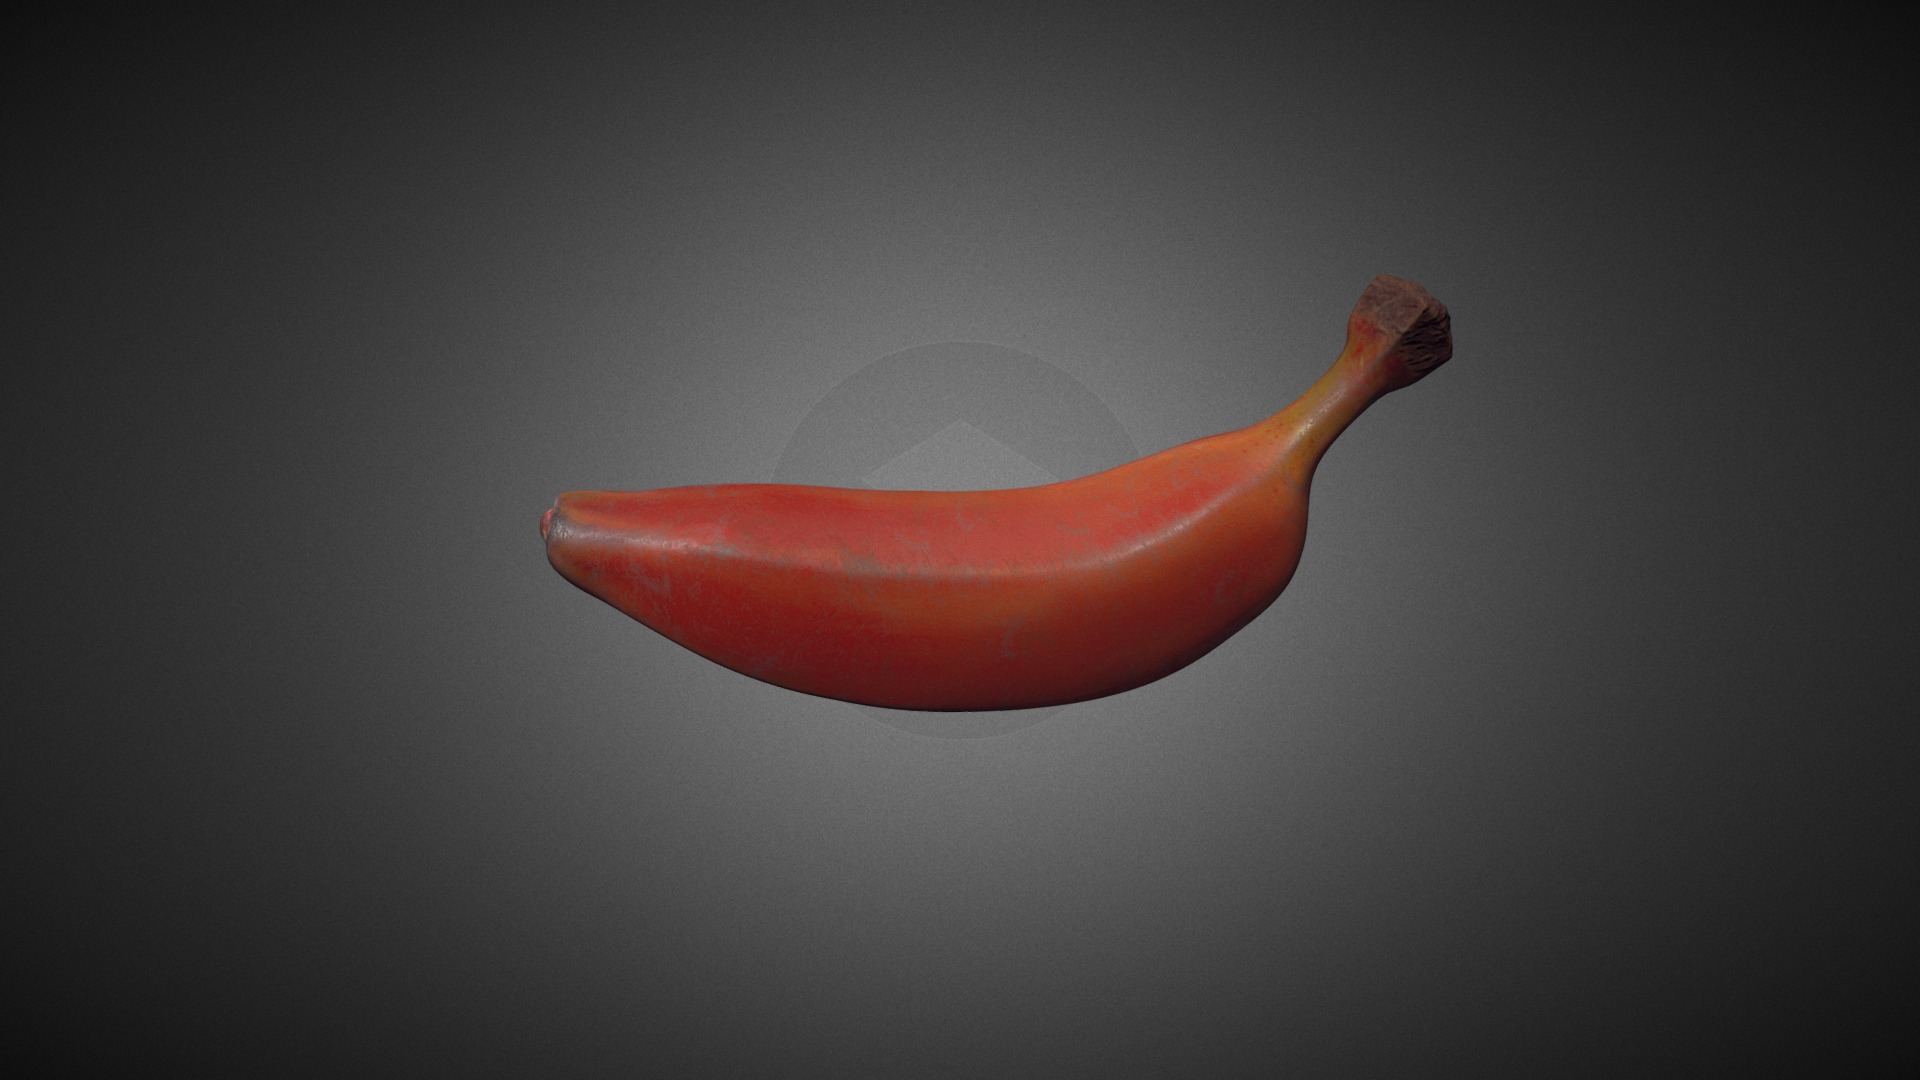 3D model Red Banana - This is a 3D model of the Red Banana. The 3D model is about a red and white hot dog.